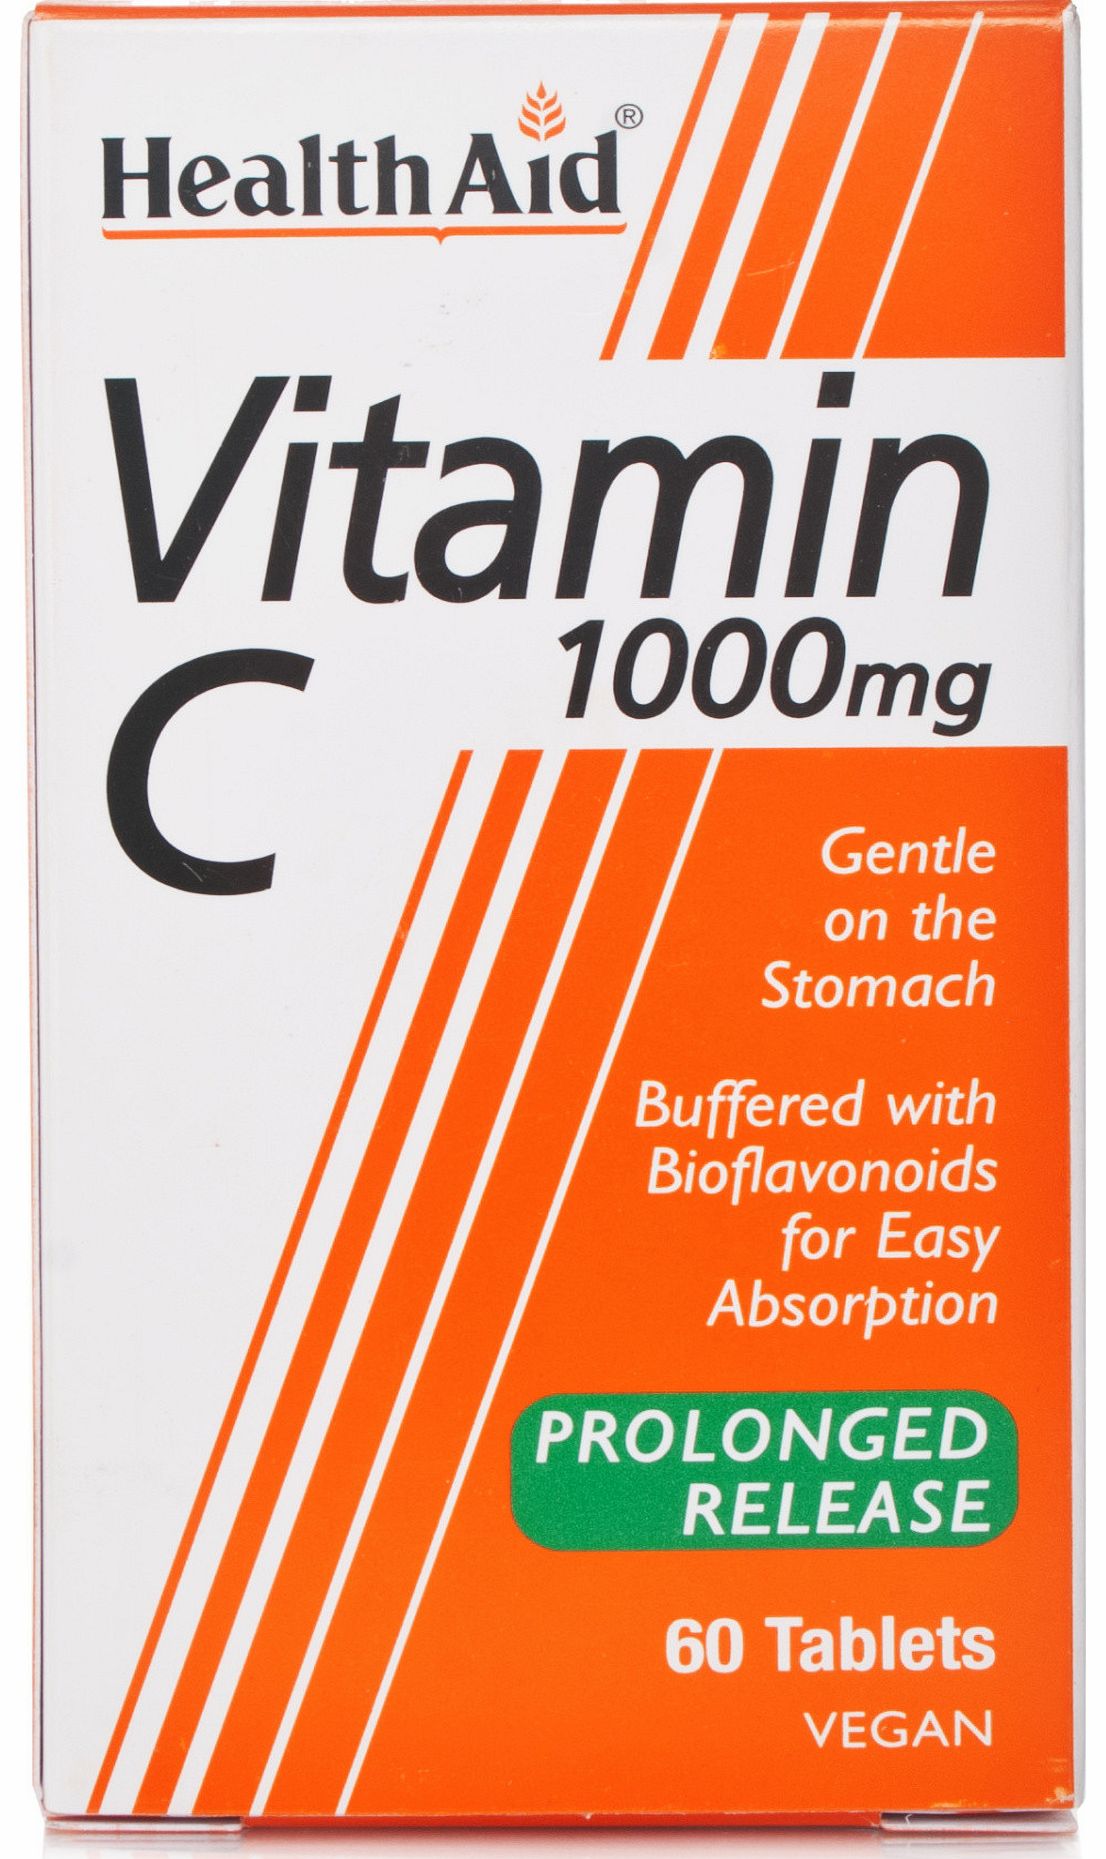 Health Aid Vitamin C 1000mg Prolonged Release is a unique way of providing your body with a sustained and steady source of Vitamin C over a prolonged period of time and also has the added benefits of acting as an antioxidant. Taking these tablets can